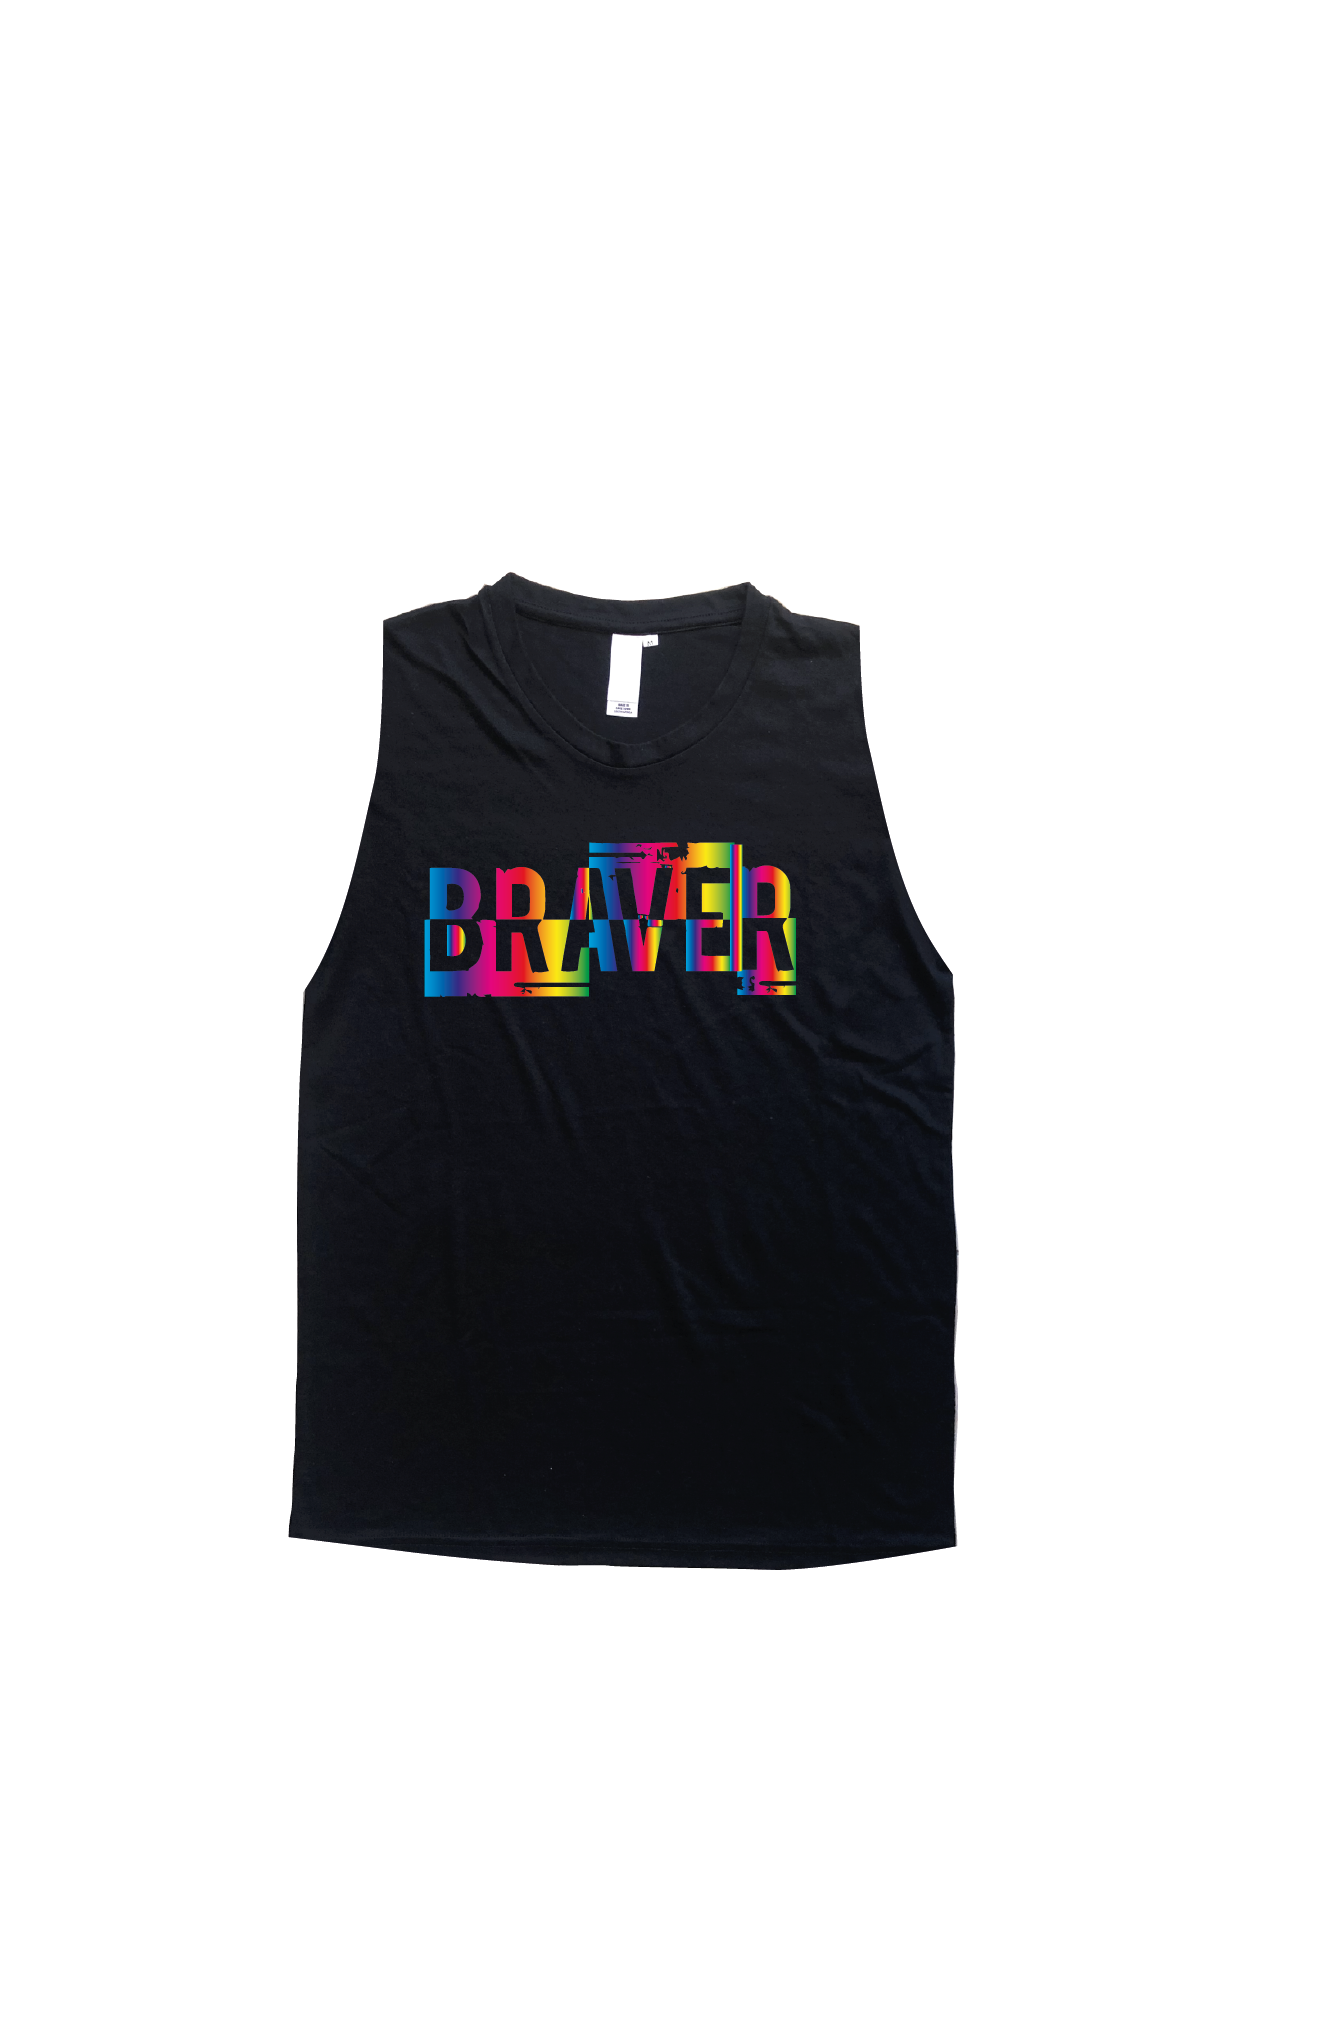 Black tank top with the word BRAVER on the chest in a rainbow print